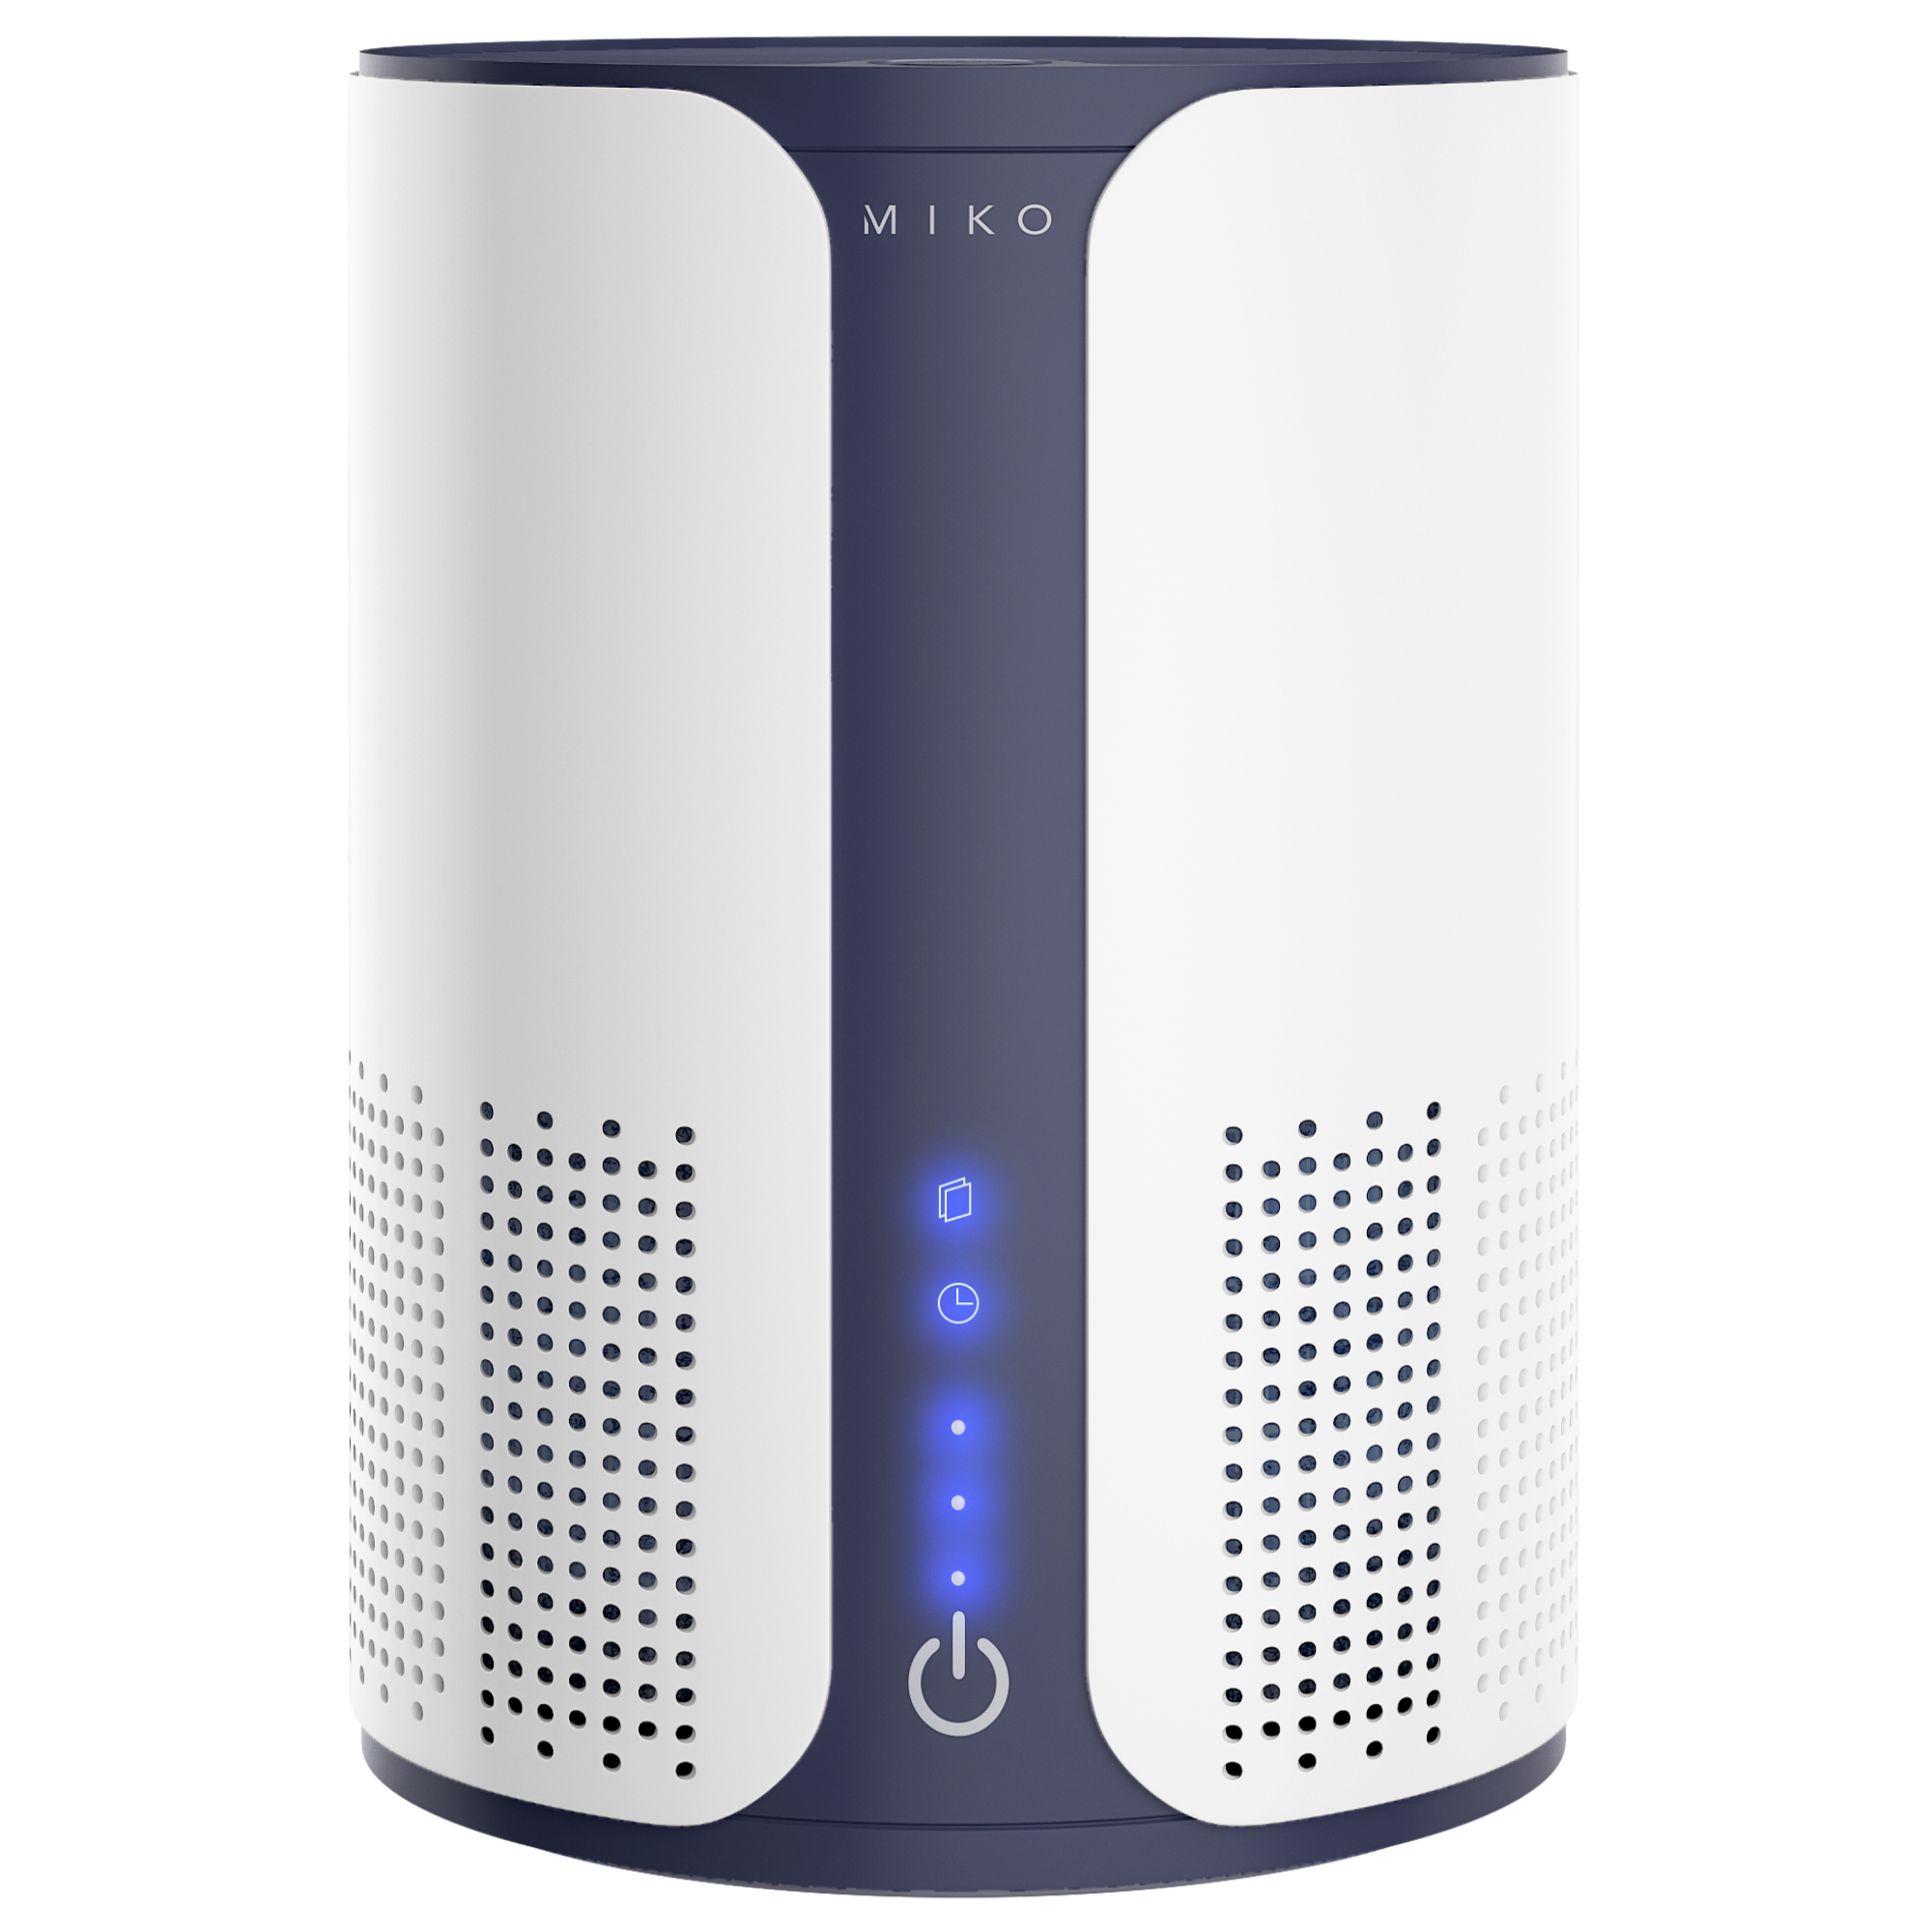 Miko Home Air Purifier with Multiple Speeds Timer True HEPA Filter to Safely Remove Dust, Pollen, Allergens, Odor - 400 Sqft Coverage - image 1 of 5